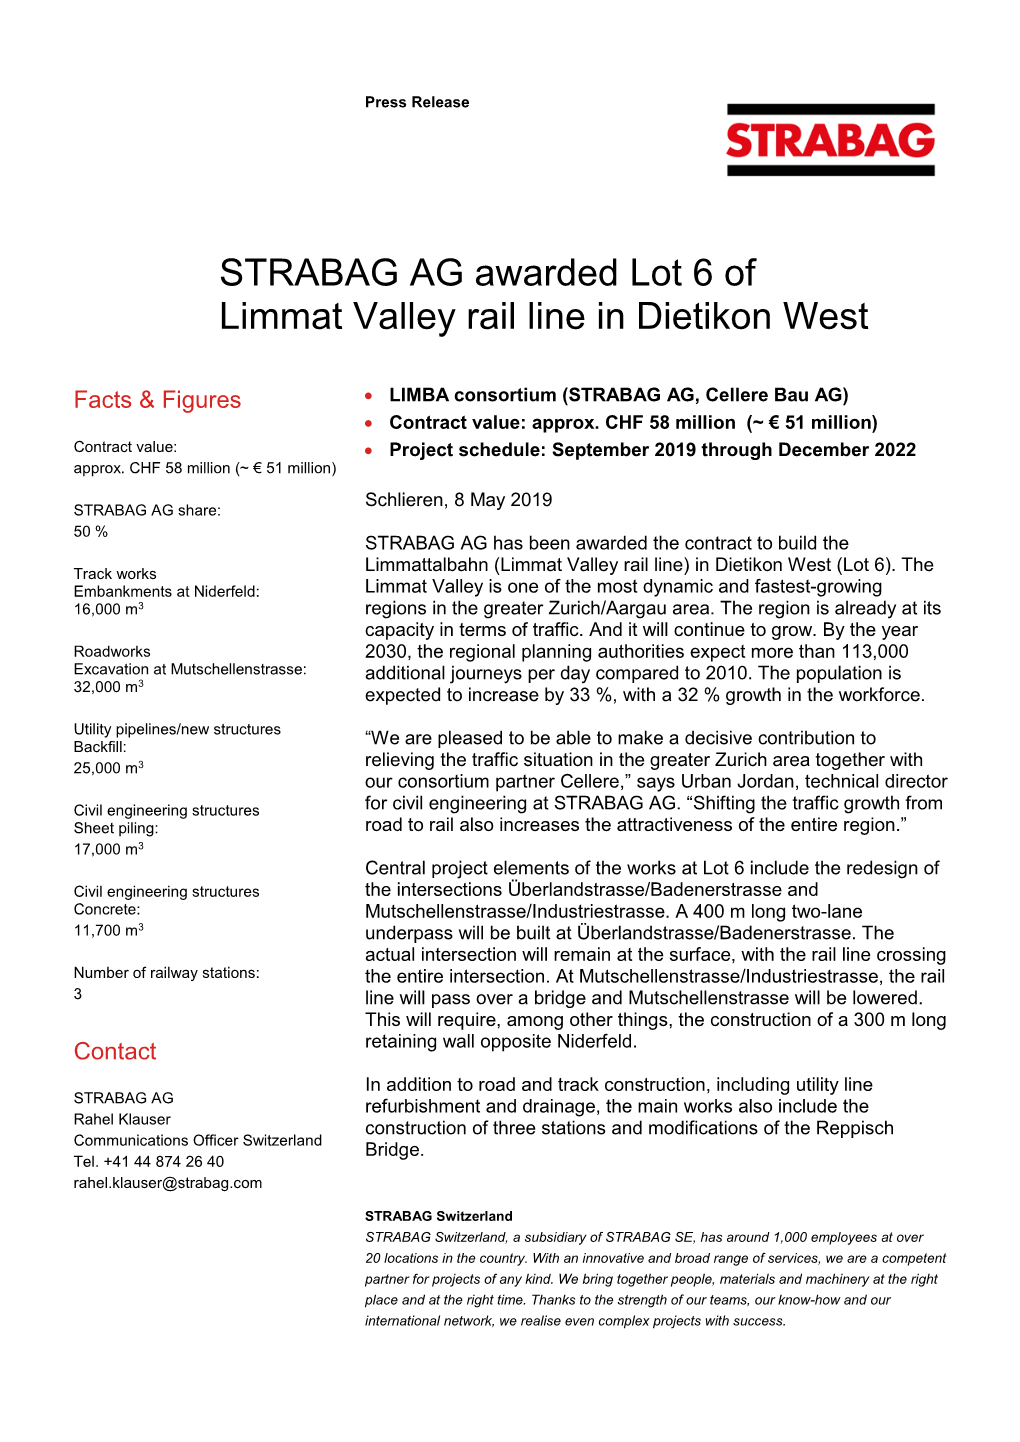 STRABAG AG Awarded Lot 6 of Limmat Valley Rail Line in Dietikon West